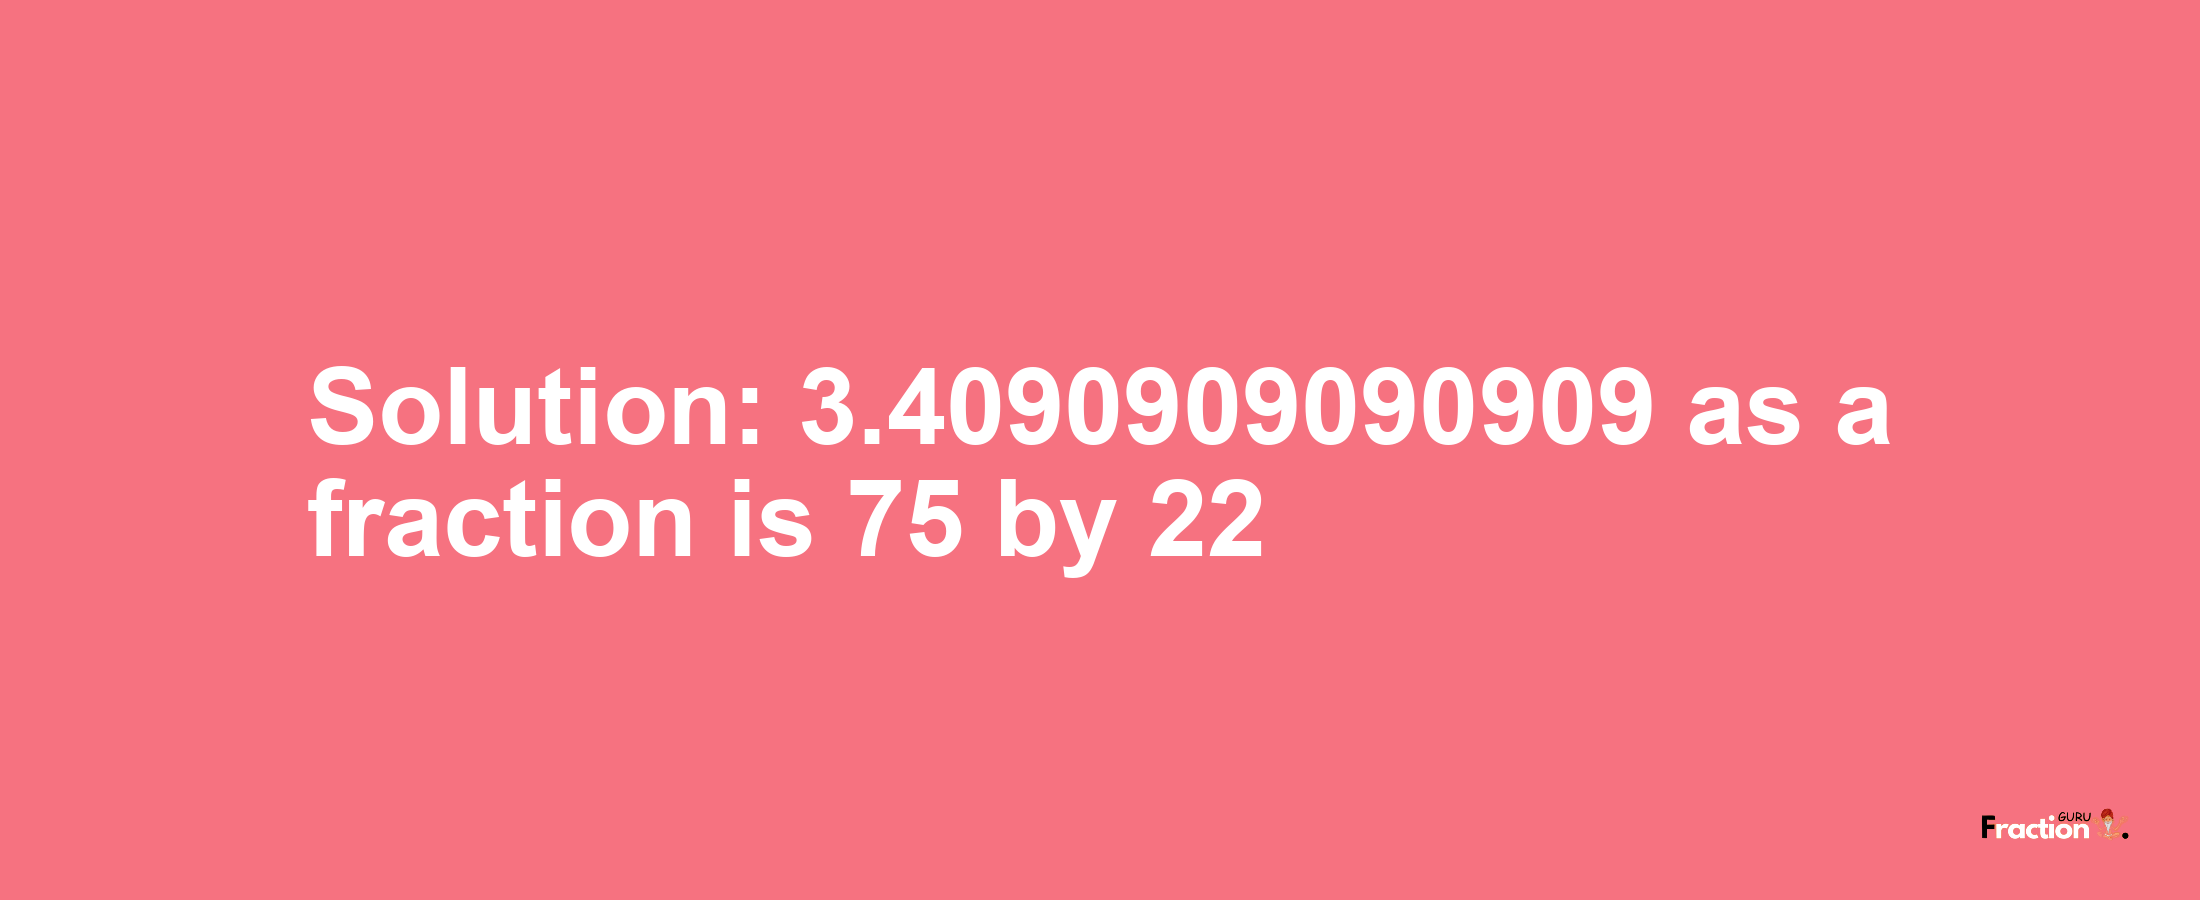 Solution:3.4090909090909 as a fraction is 75/22